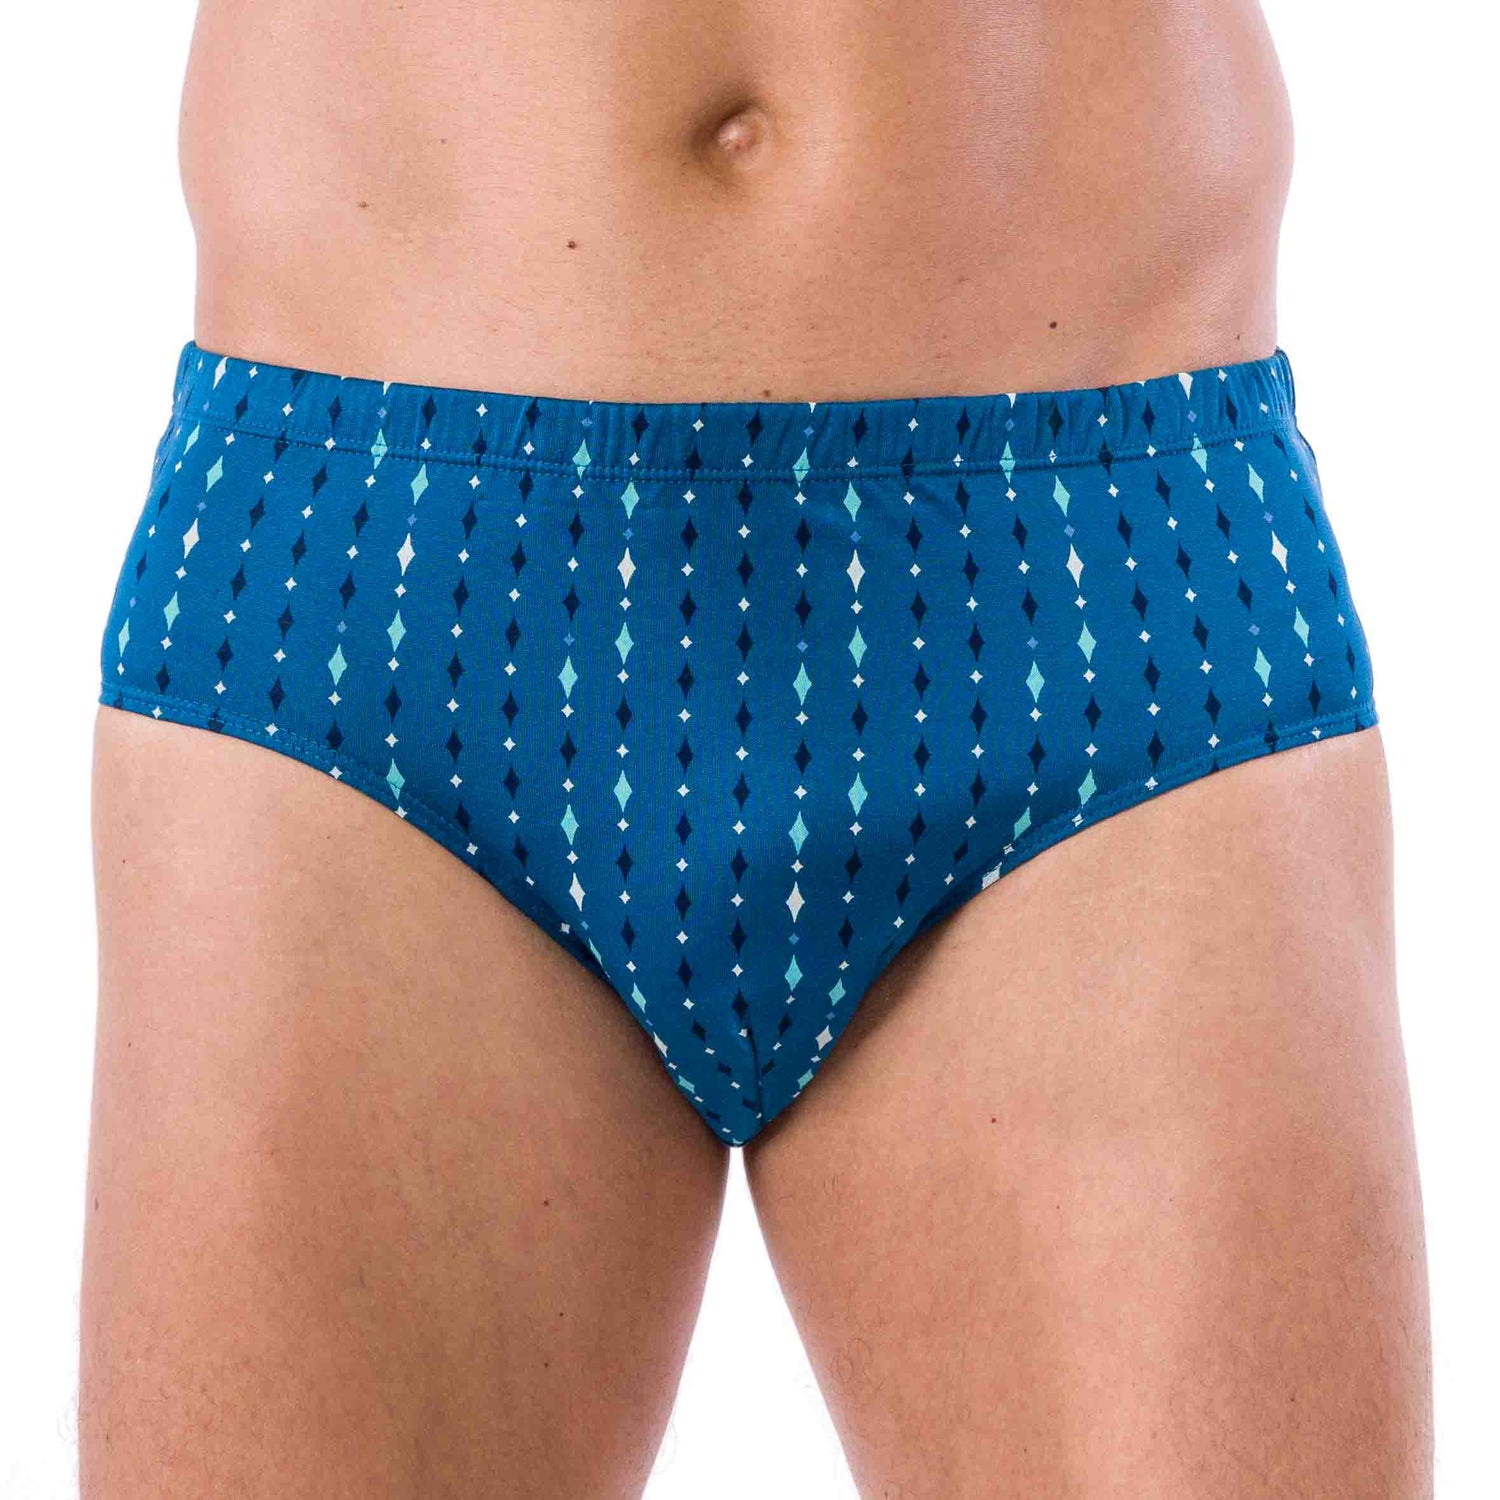 Pack of 2 HIGH Waist Briefs in Mercerized Cotton Jersey with NAVY STRIPE and BLUE Print